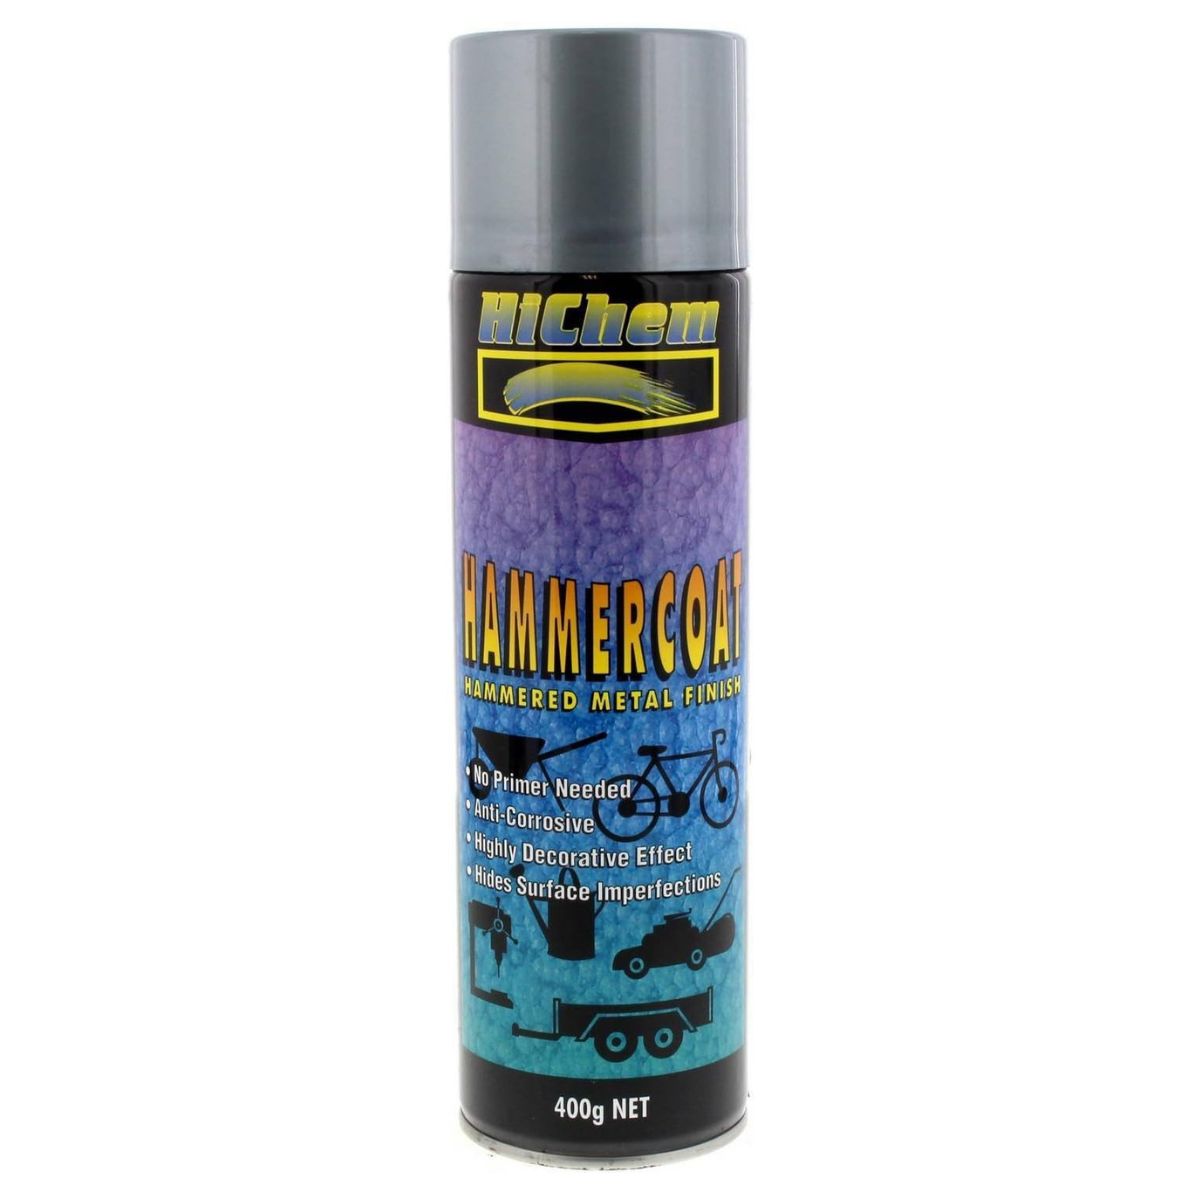 Hammercoat Silver Grey Spray Paint Can 400g HiChem Decorative Effect Tough - South East Clearance Centre